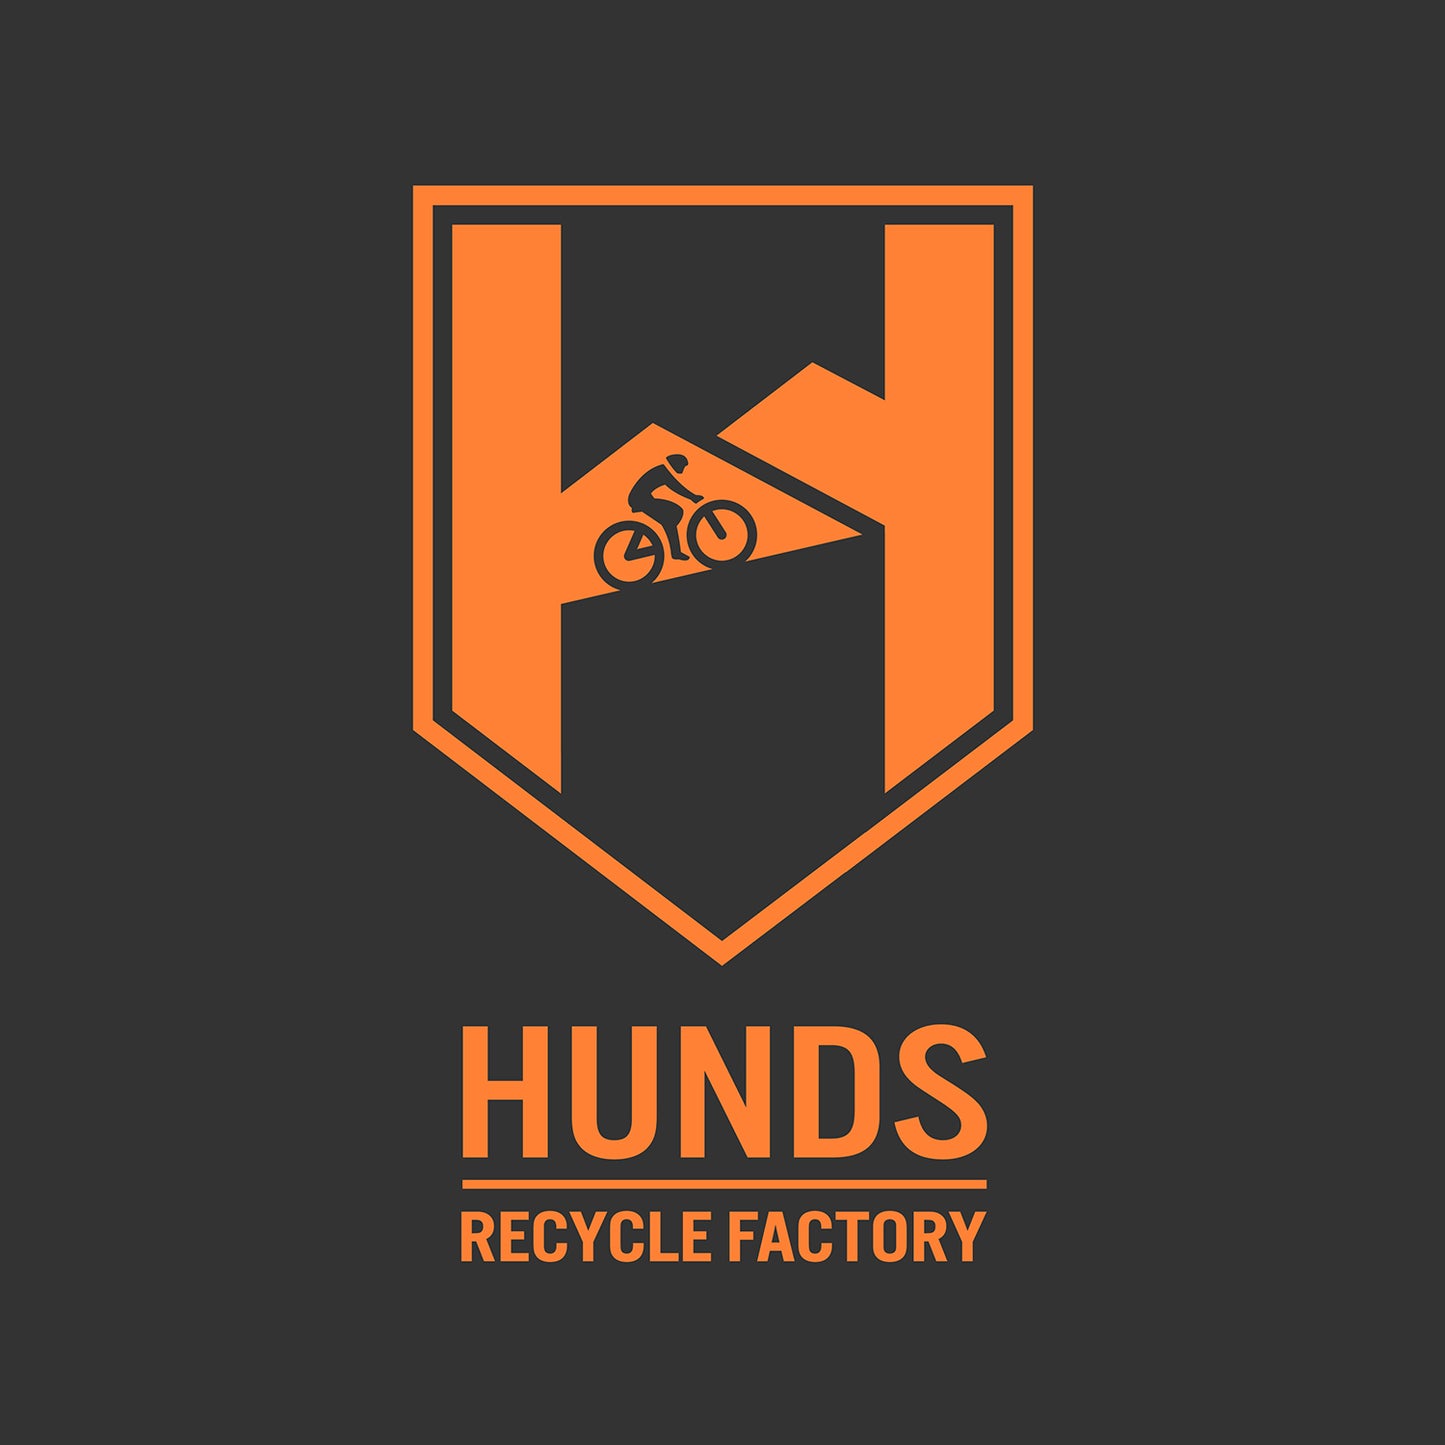 Hunds Recycle Factory